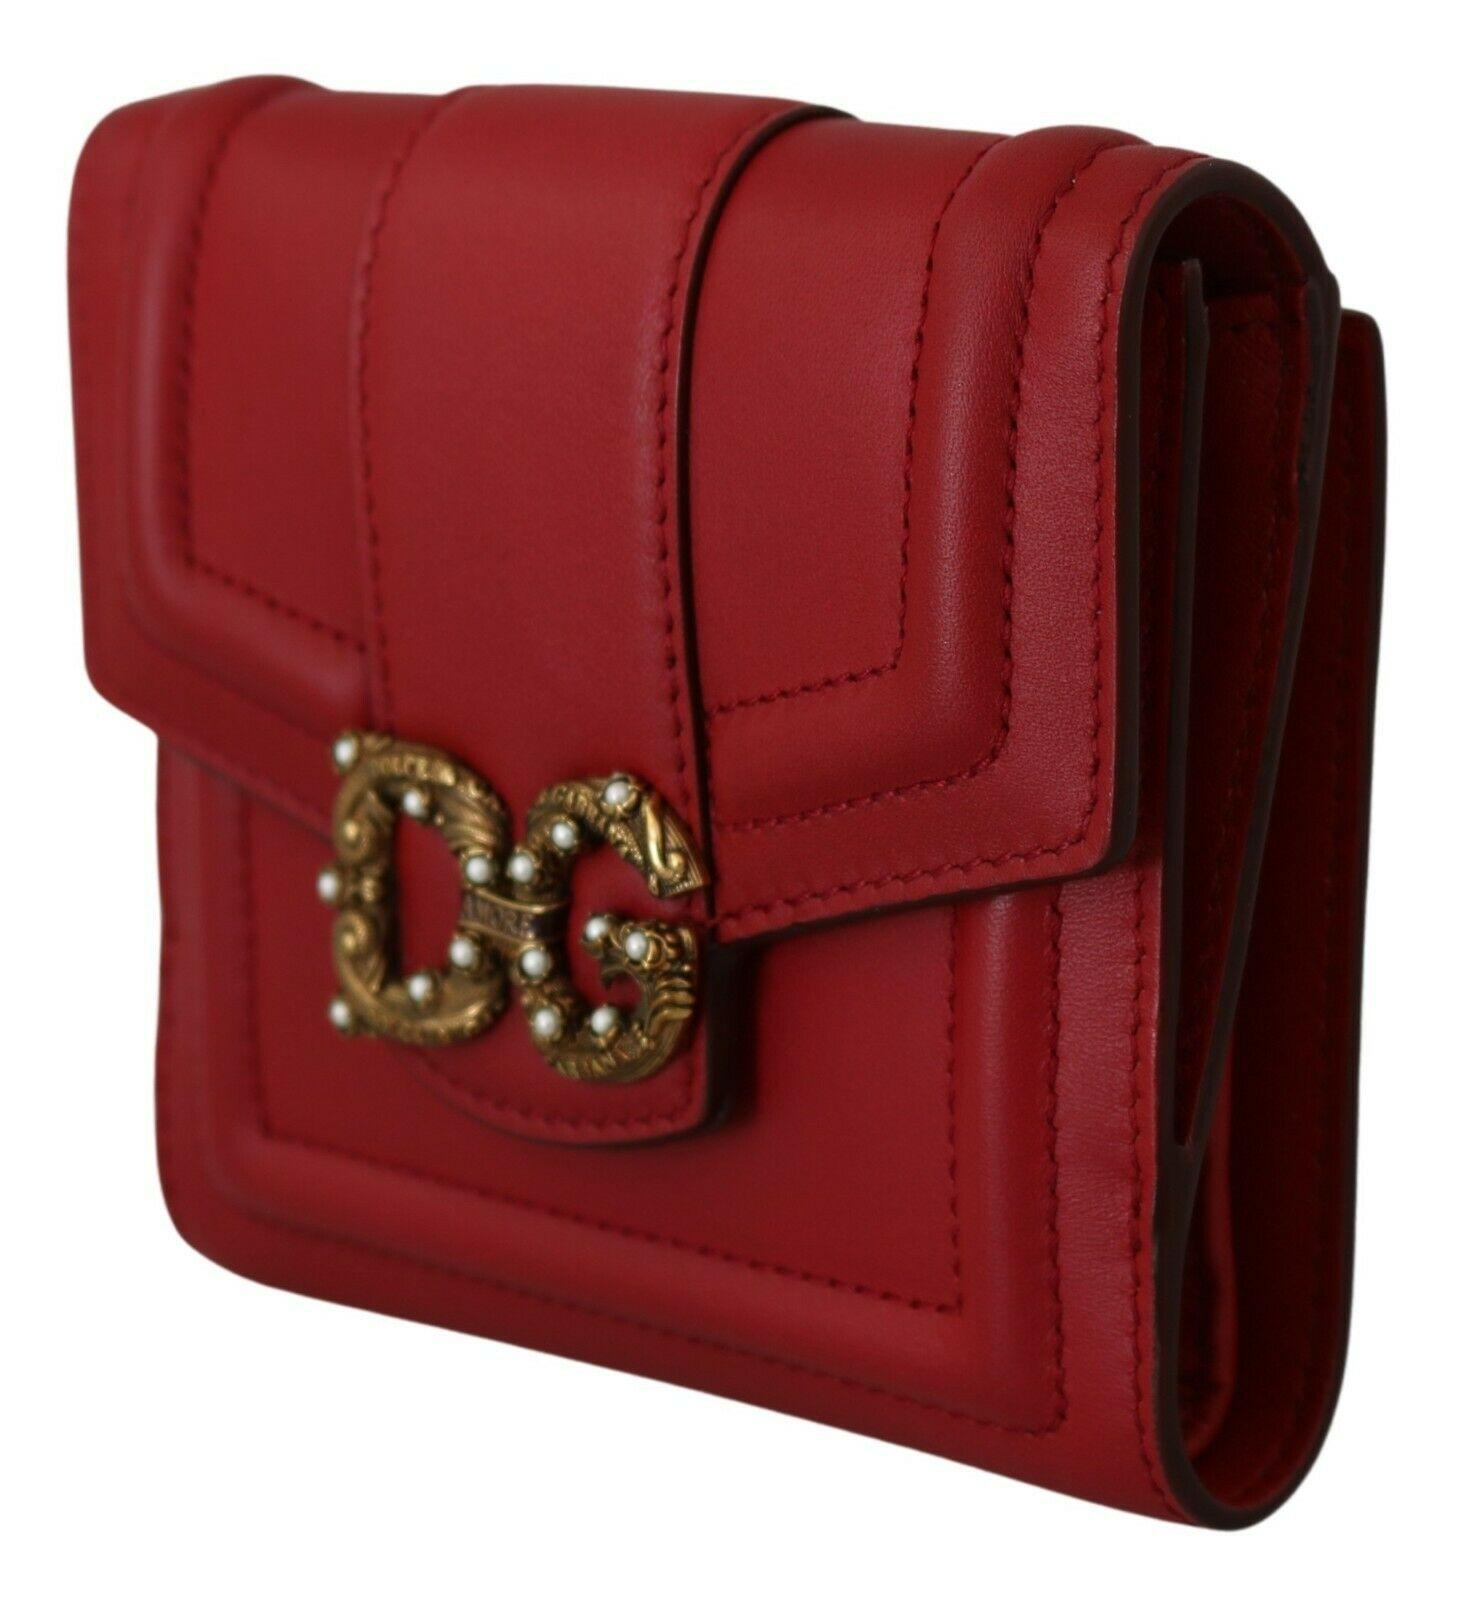 Gorgeous brand new with tags, 100% Authentic Dolce & Gabbana wallet.



Model: AMORE, Trifold, wallet clutch
Material: 100% Leather
Color: Red, gold metal detailing
Cardholder slots and coin pocket, bill slot
Logo engraved metal hardware
Made in